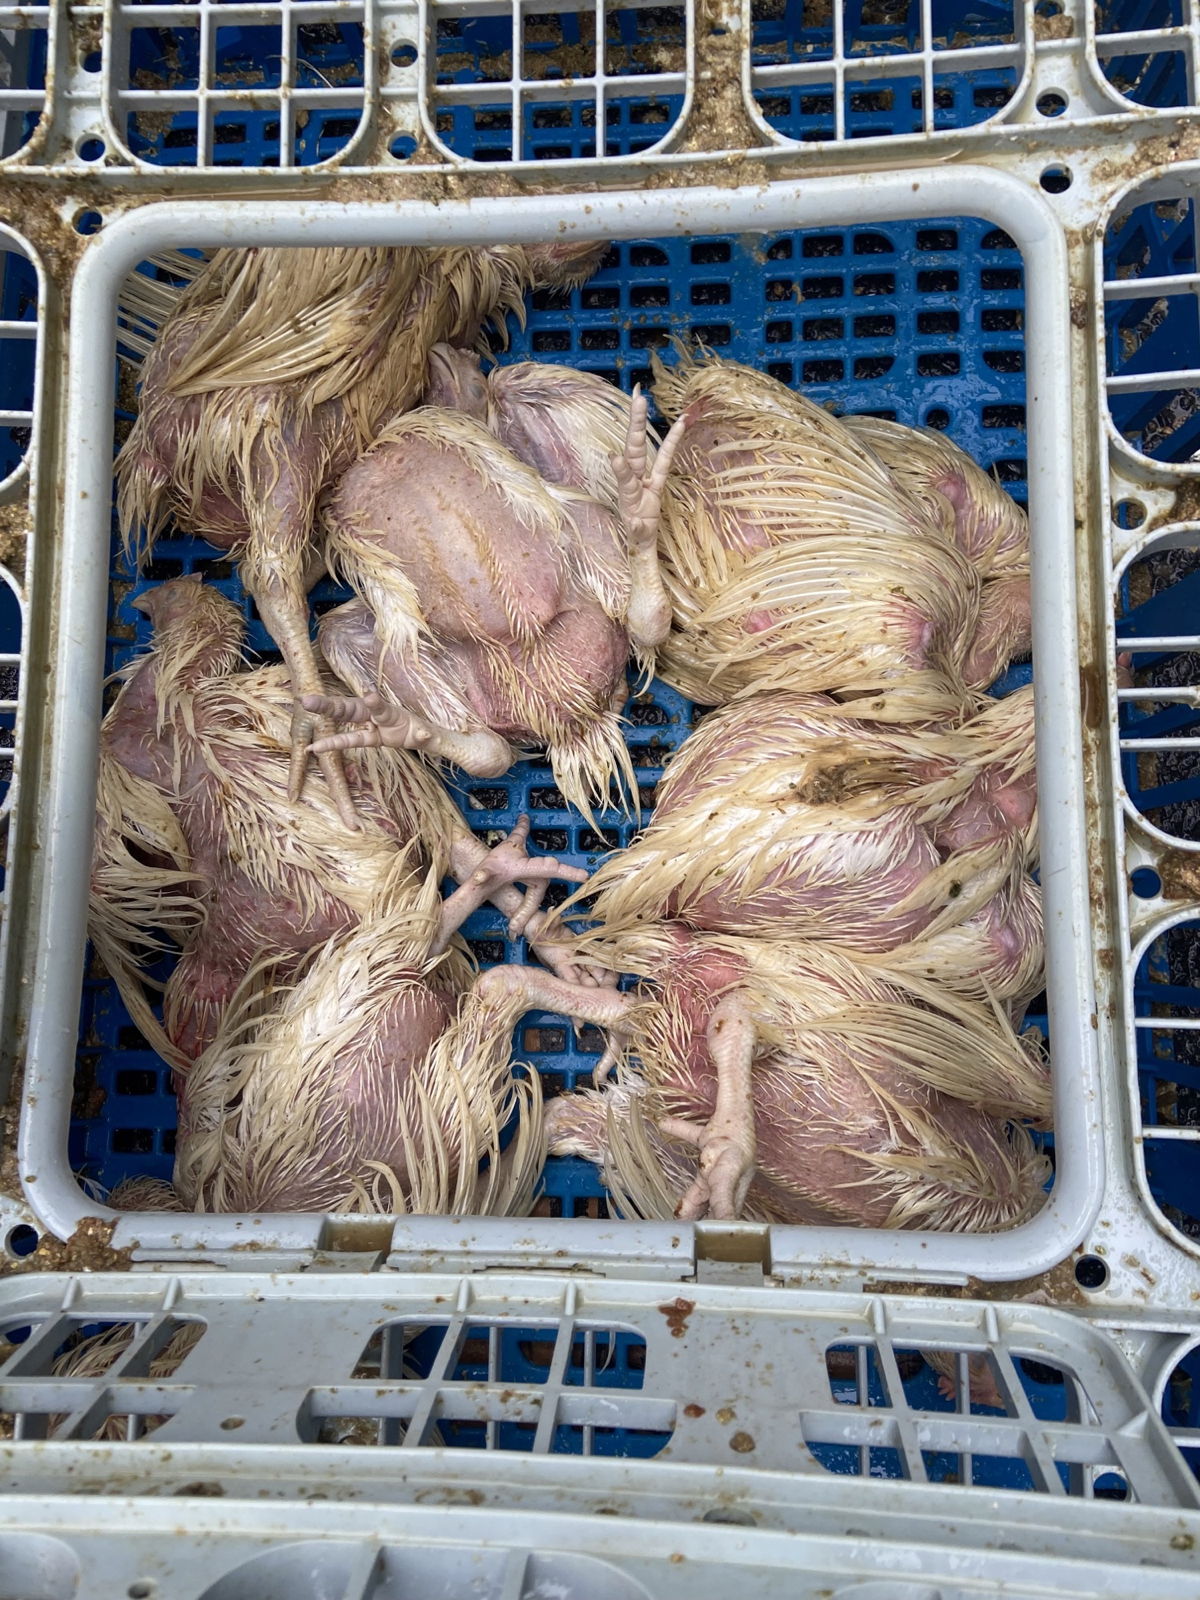 Seven chickens in a crate that appear to have died